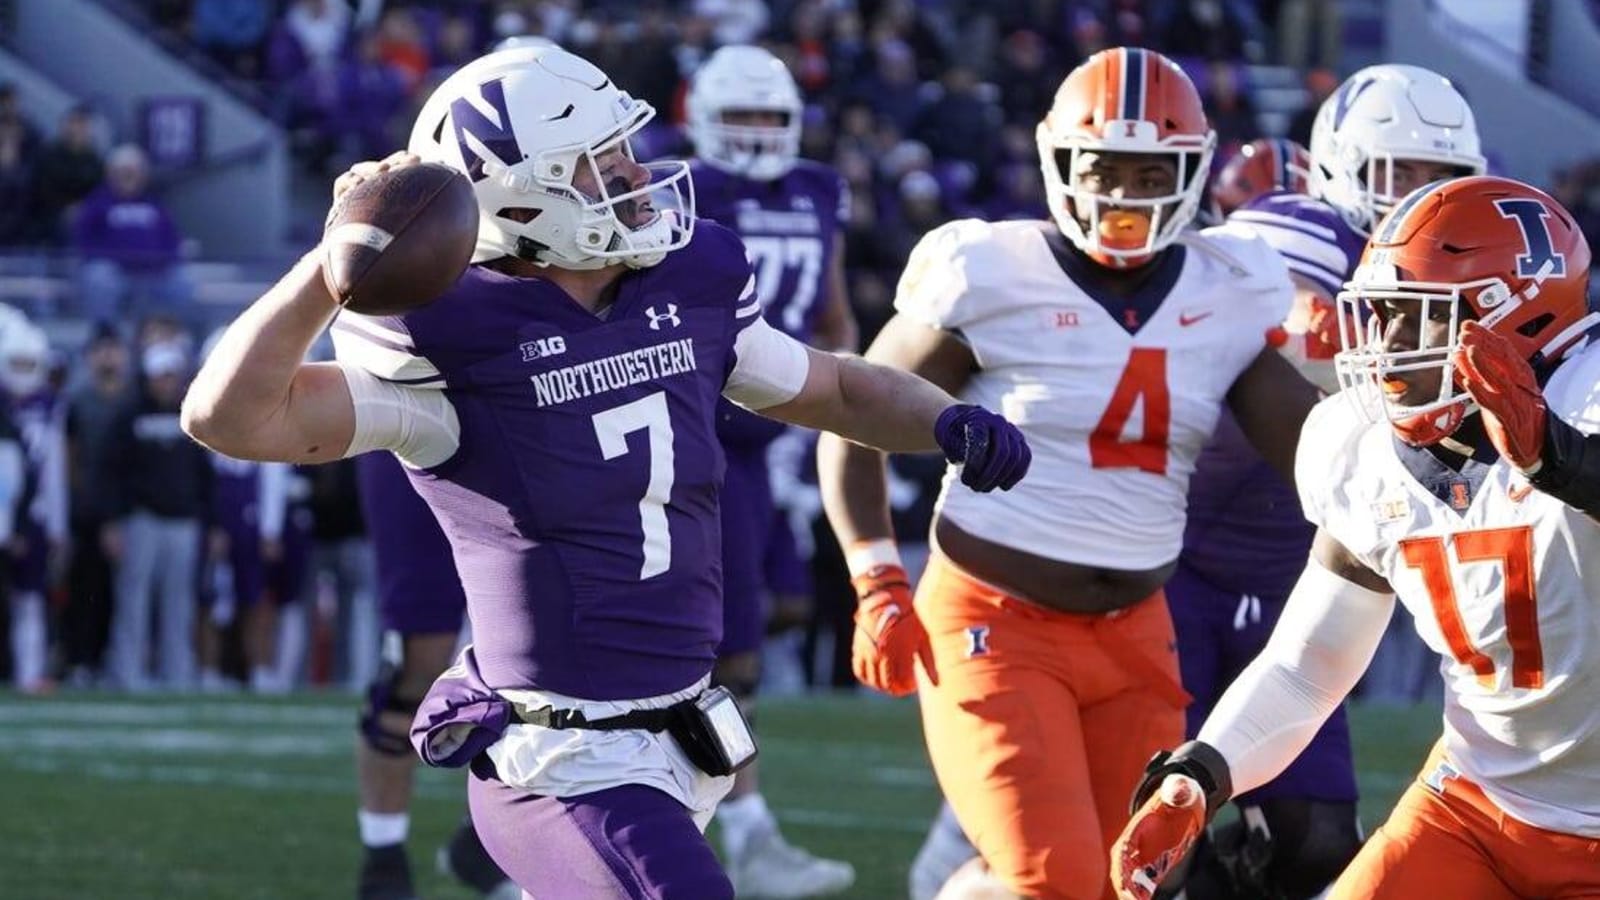 Sydney Brown notches two defensive TDs as Illinois whips Northwestern